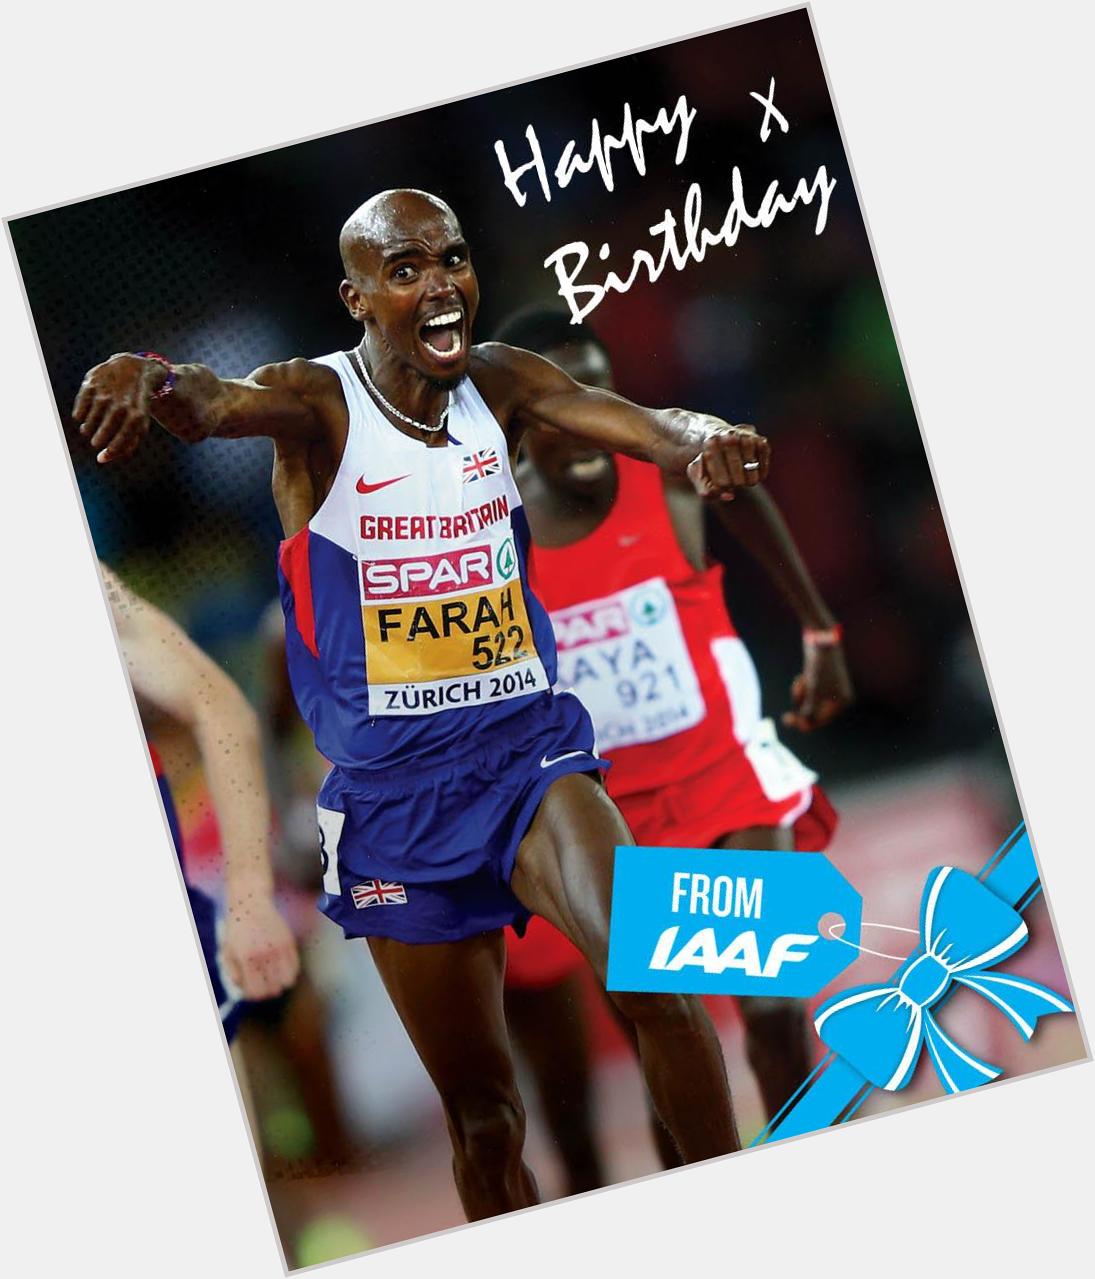 Happy birthday to double Olympic champ, three-time world champ and newly crowned European HM record holder 